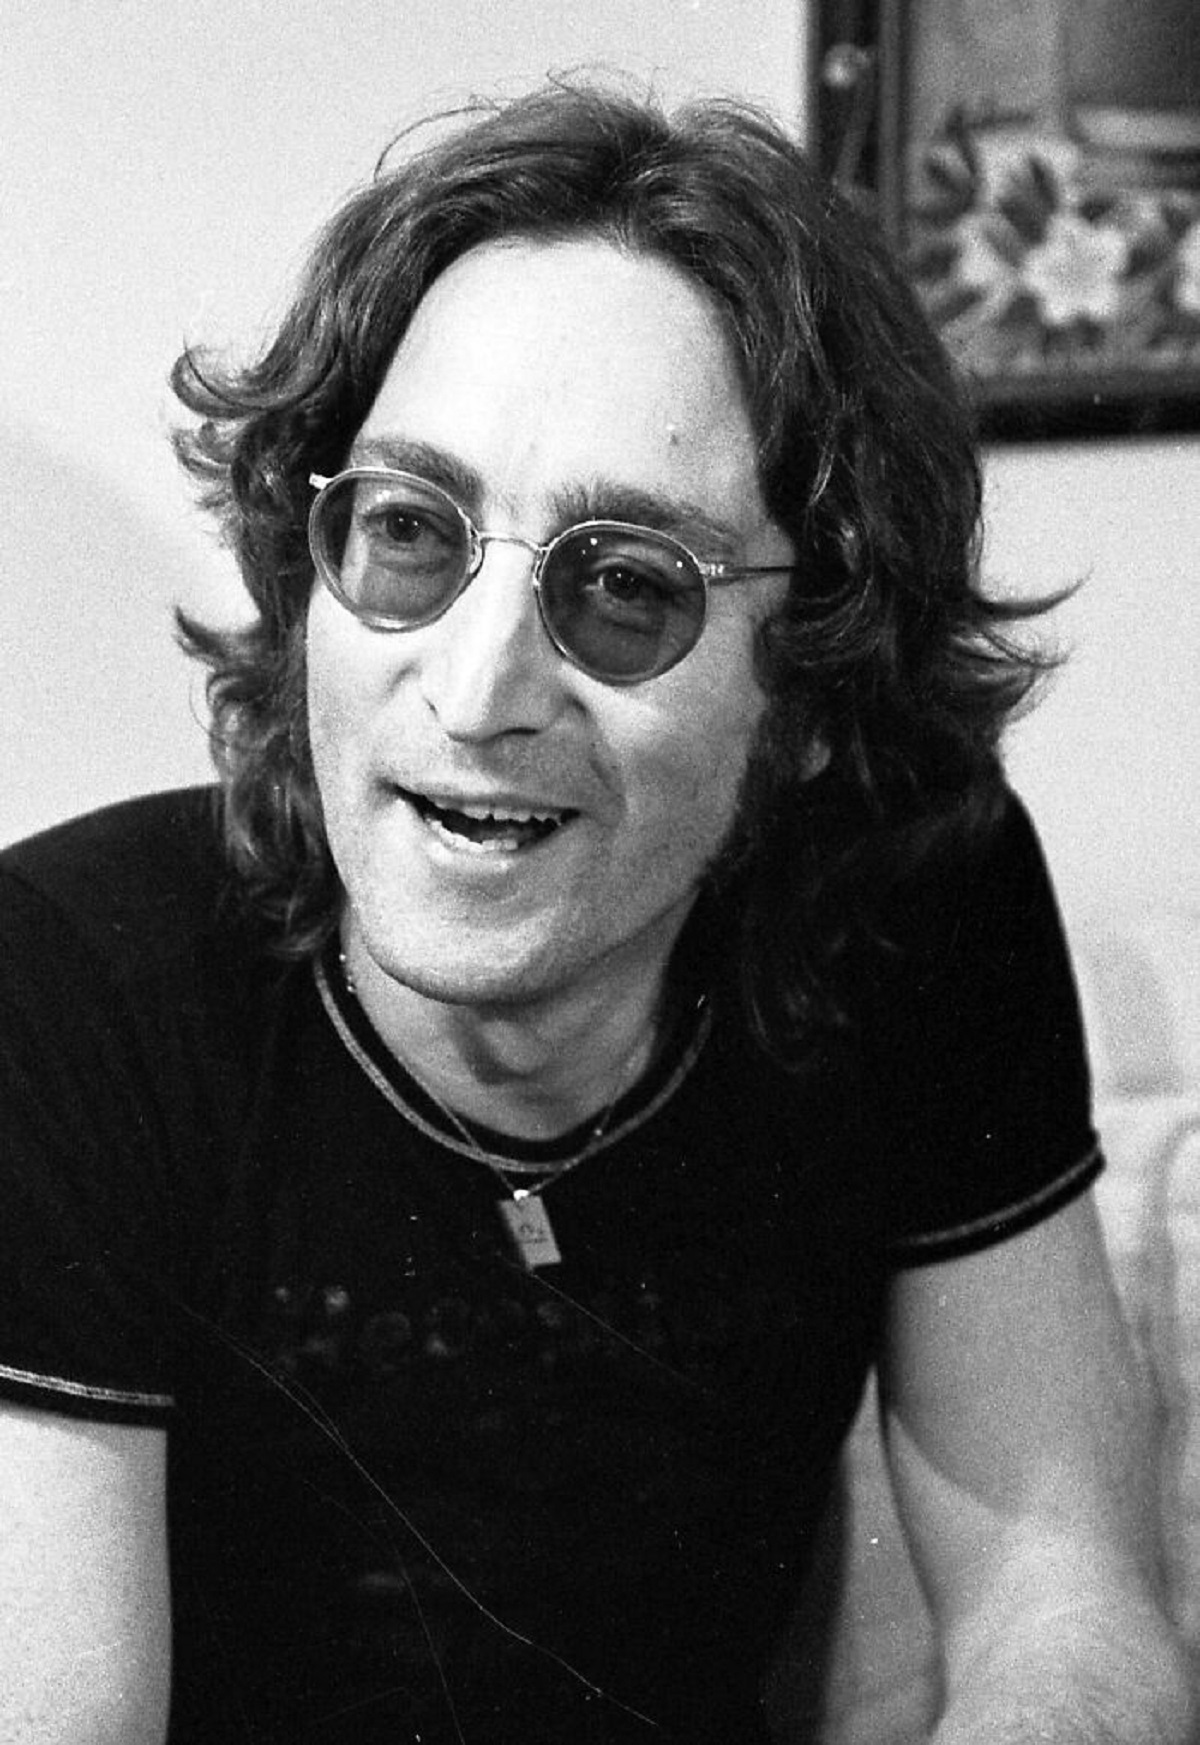 John Lennon sang about peace and love and then went home and beat his wife and kid.